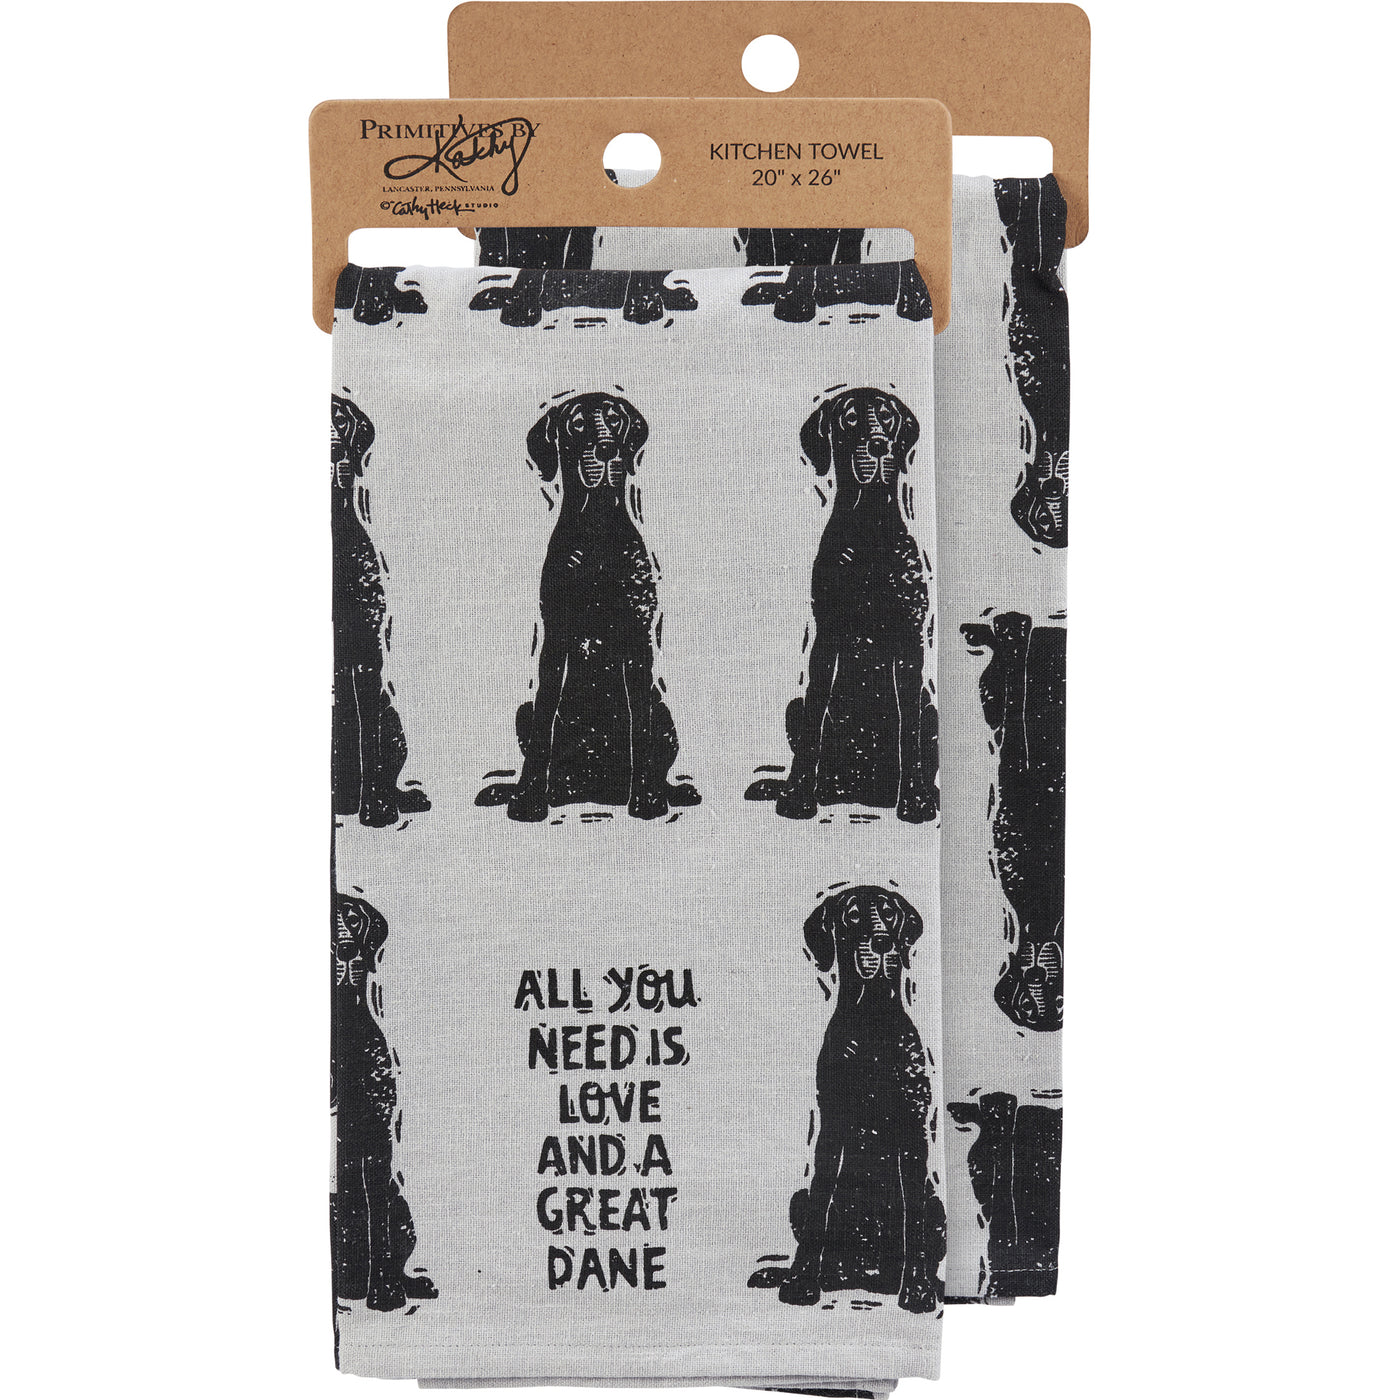 All You Need Is Love And A Great Dane Dog Kitchen Towel